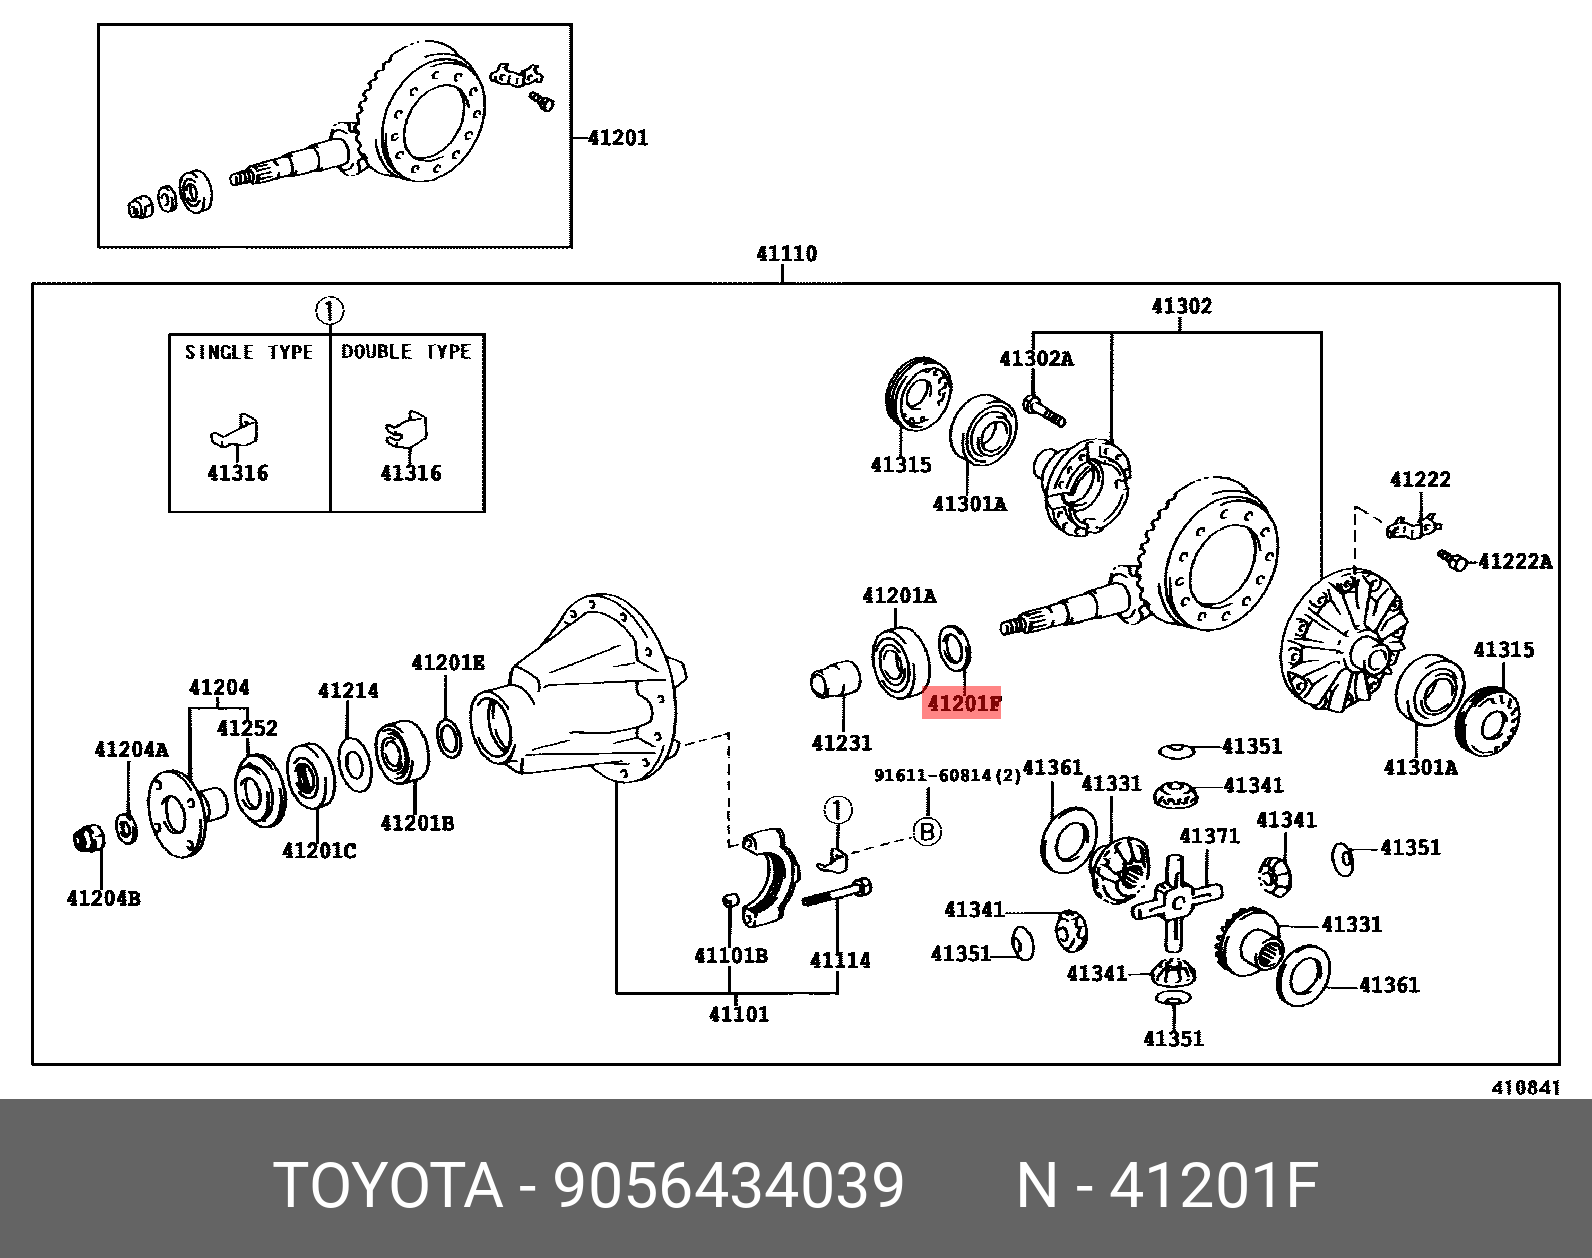 9056434039, HARRIER 199712-200302, ACU1#, MCU1#, SXU1#, WASHER, PLATE (FOR REAR DIFFERENTIAL DRIVE PINION)